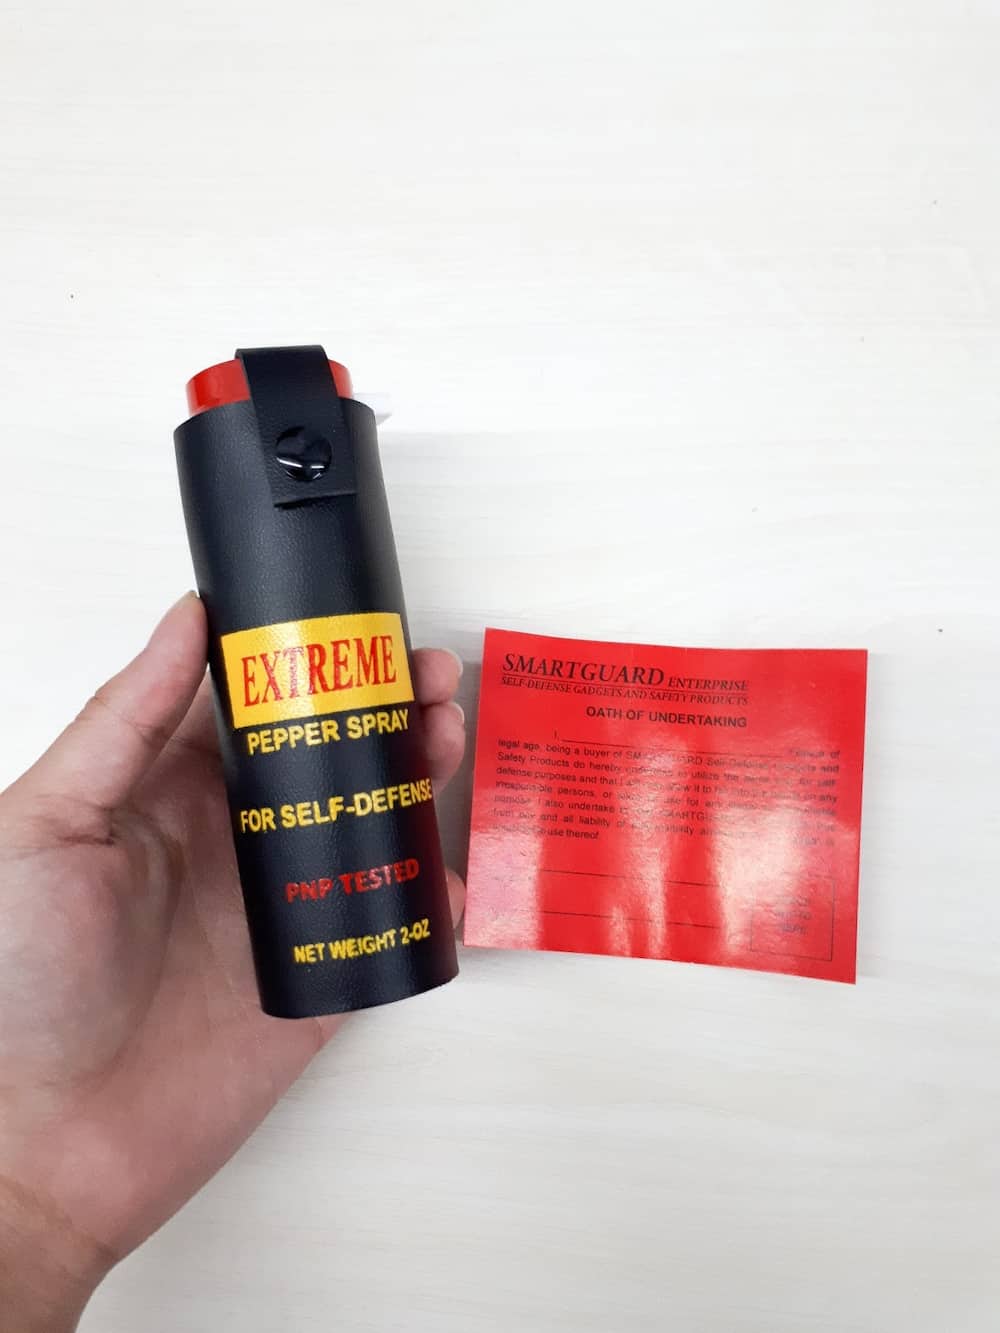 Where to buy pepper spray in Philippines for self-defense